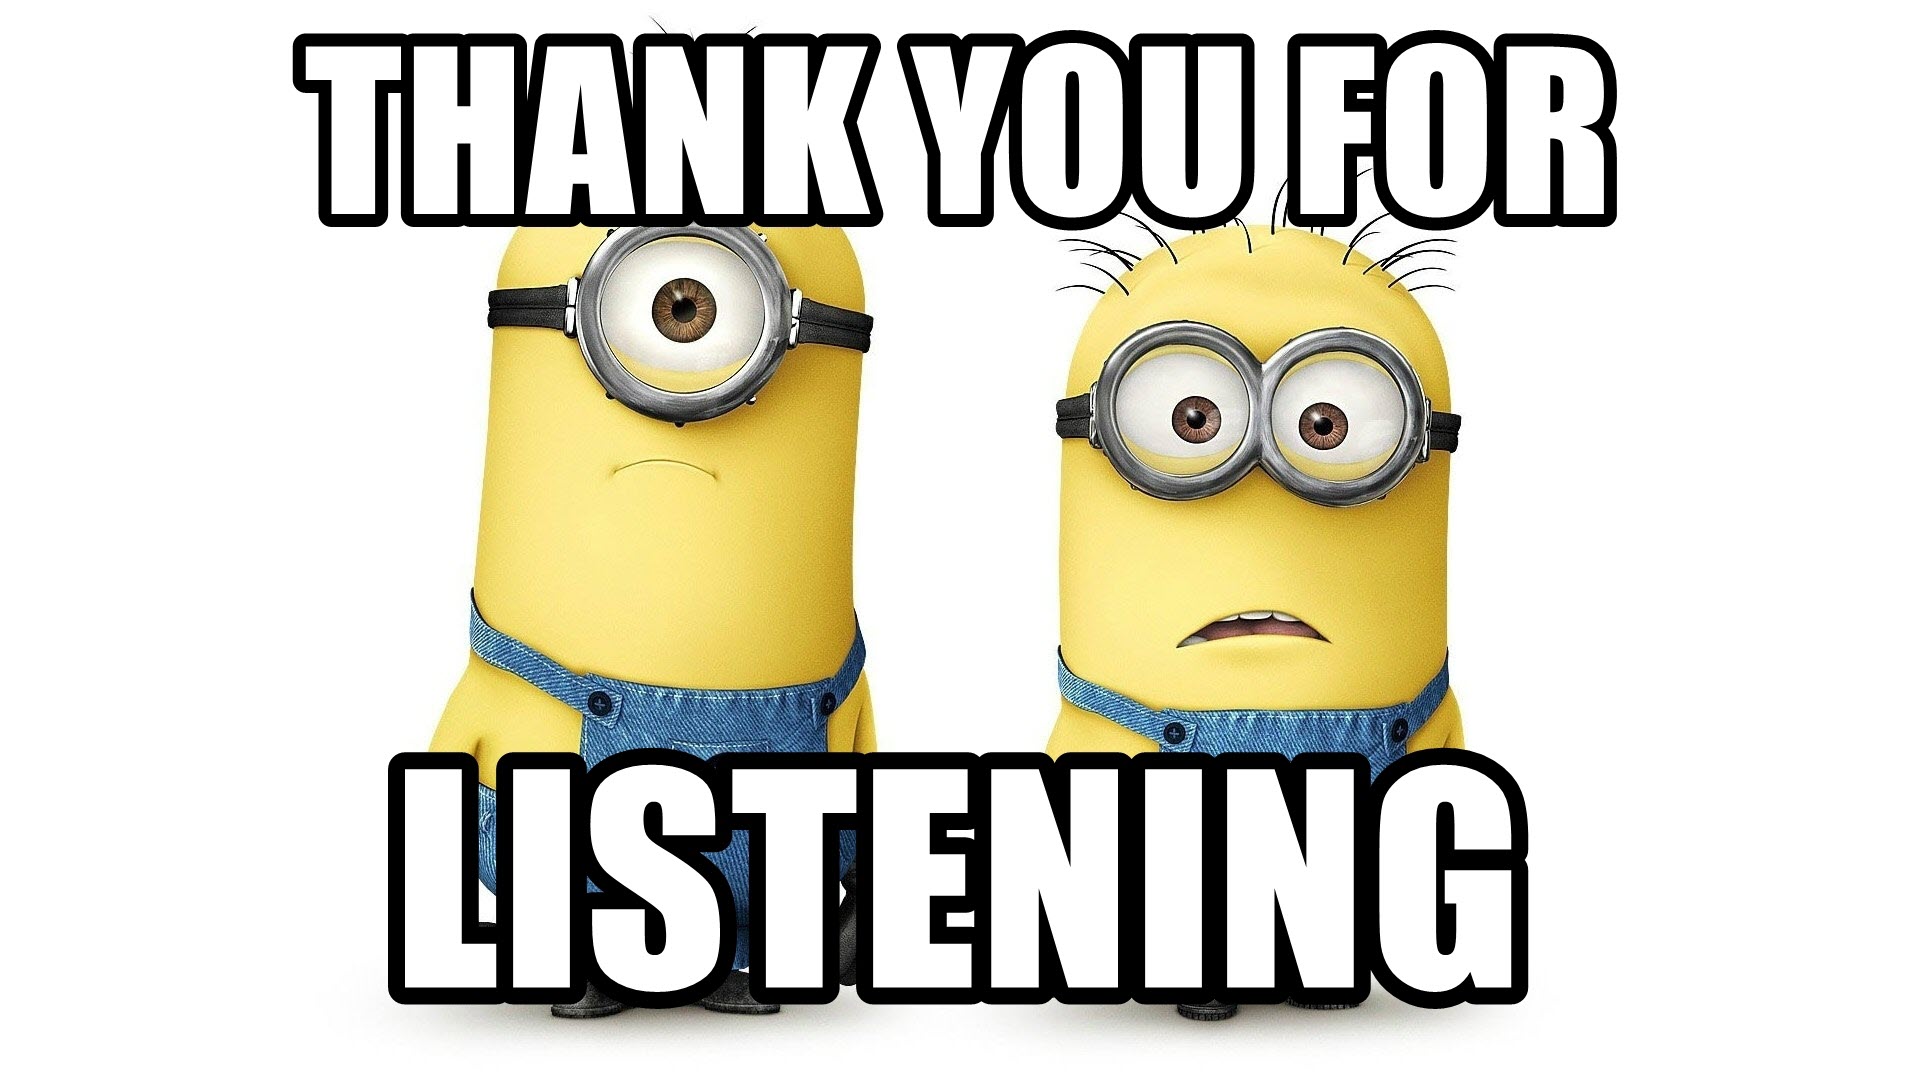 Ảnh thank you for listening cho PowerPoint